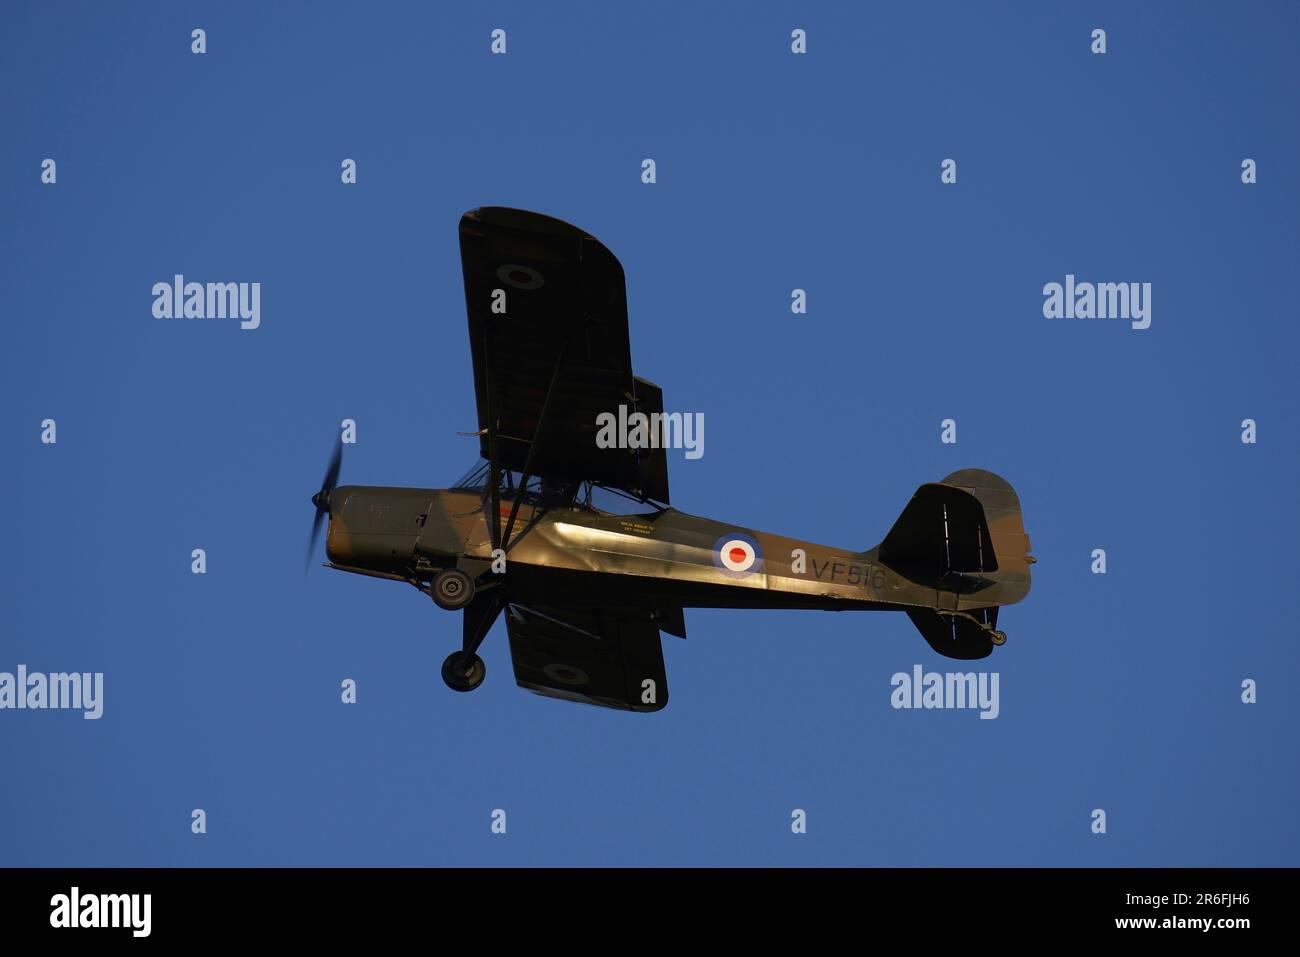 stock Alamy hi-res images wing photography high - and Piston monoplane engine